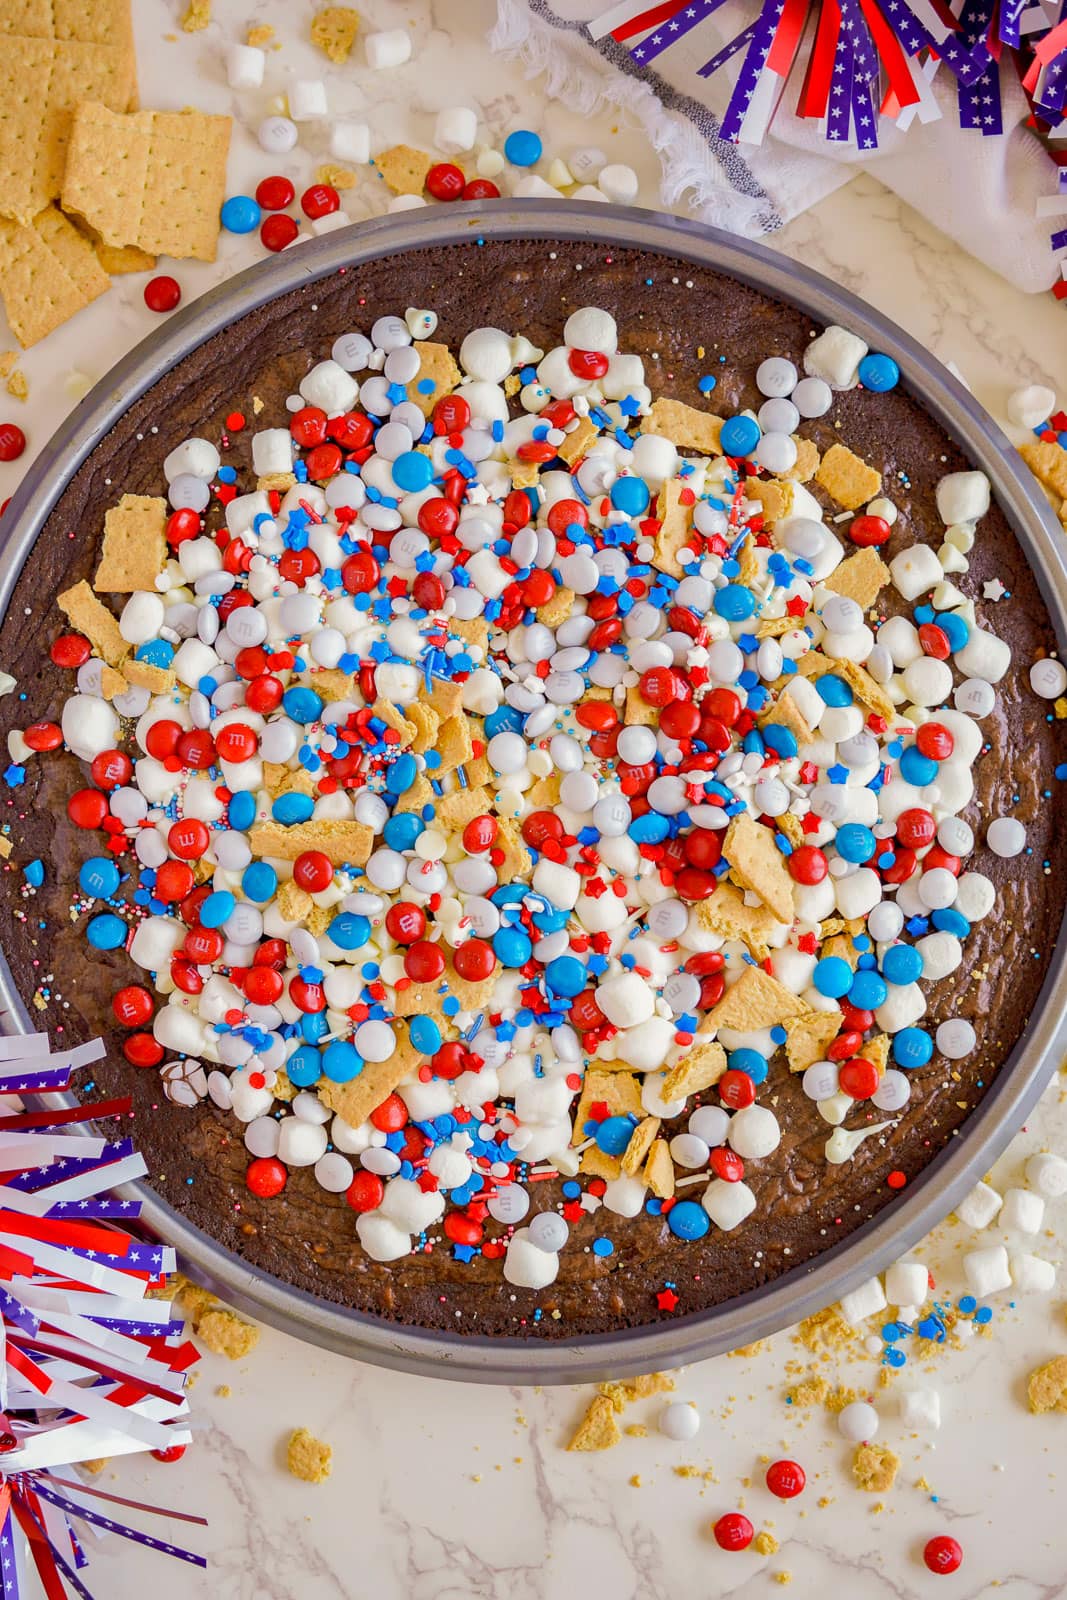 Brownie Pizza with patriotic toppings.